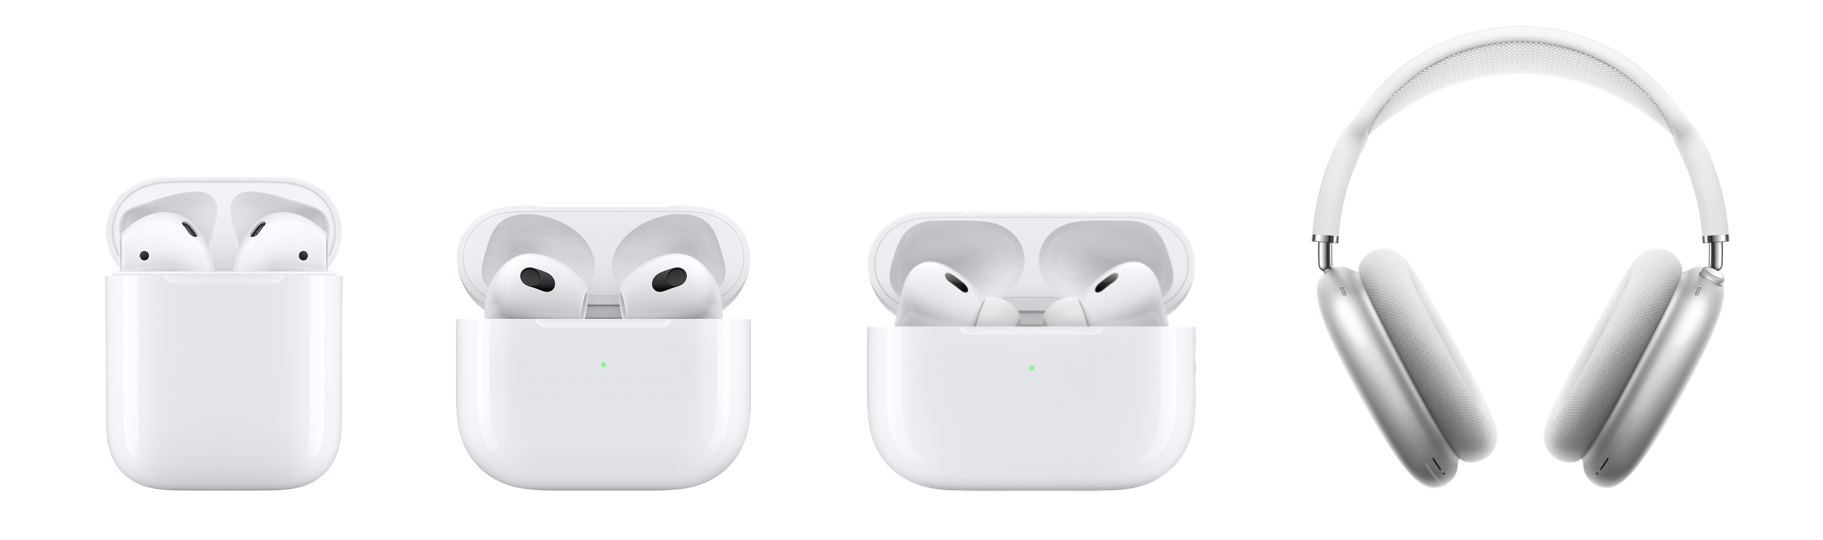 AirPods 3 vs AirPods (2019): What's the difference?